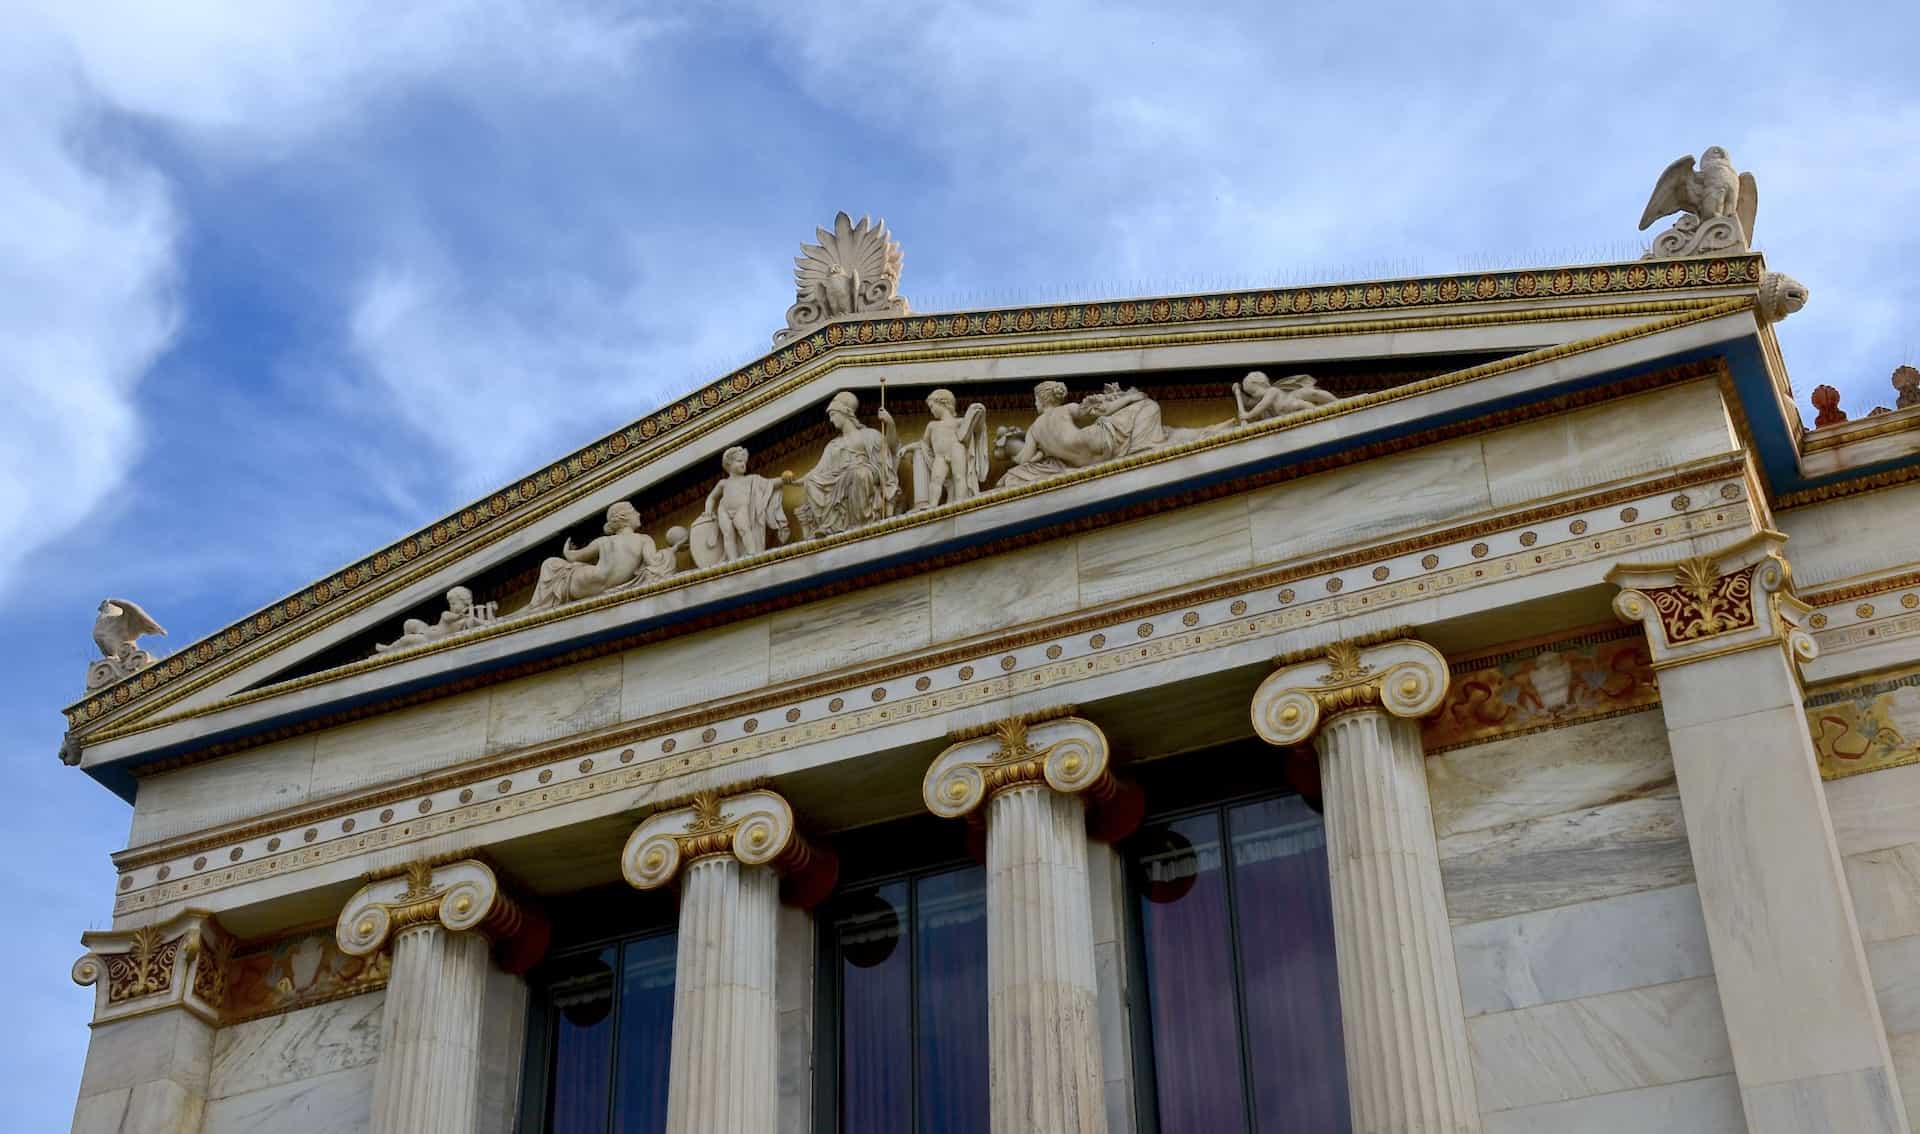 Northeast pediment of the north wing of the Academy of Athens